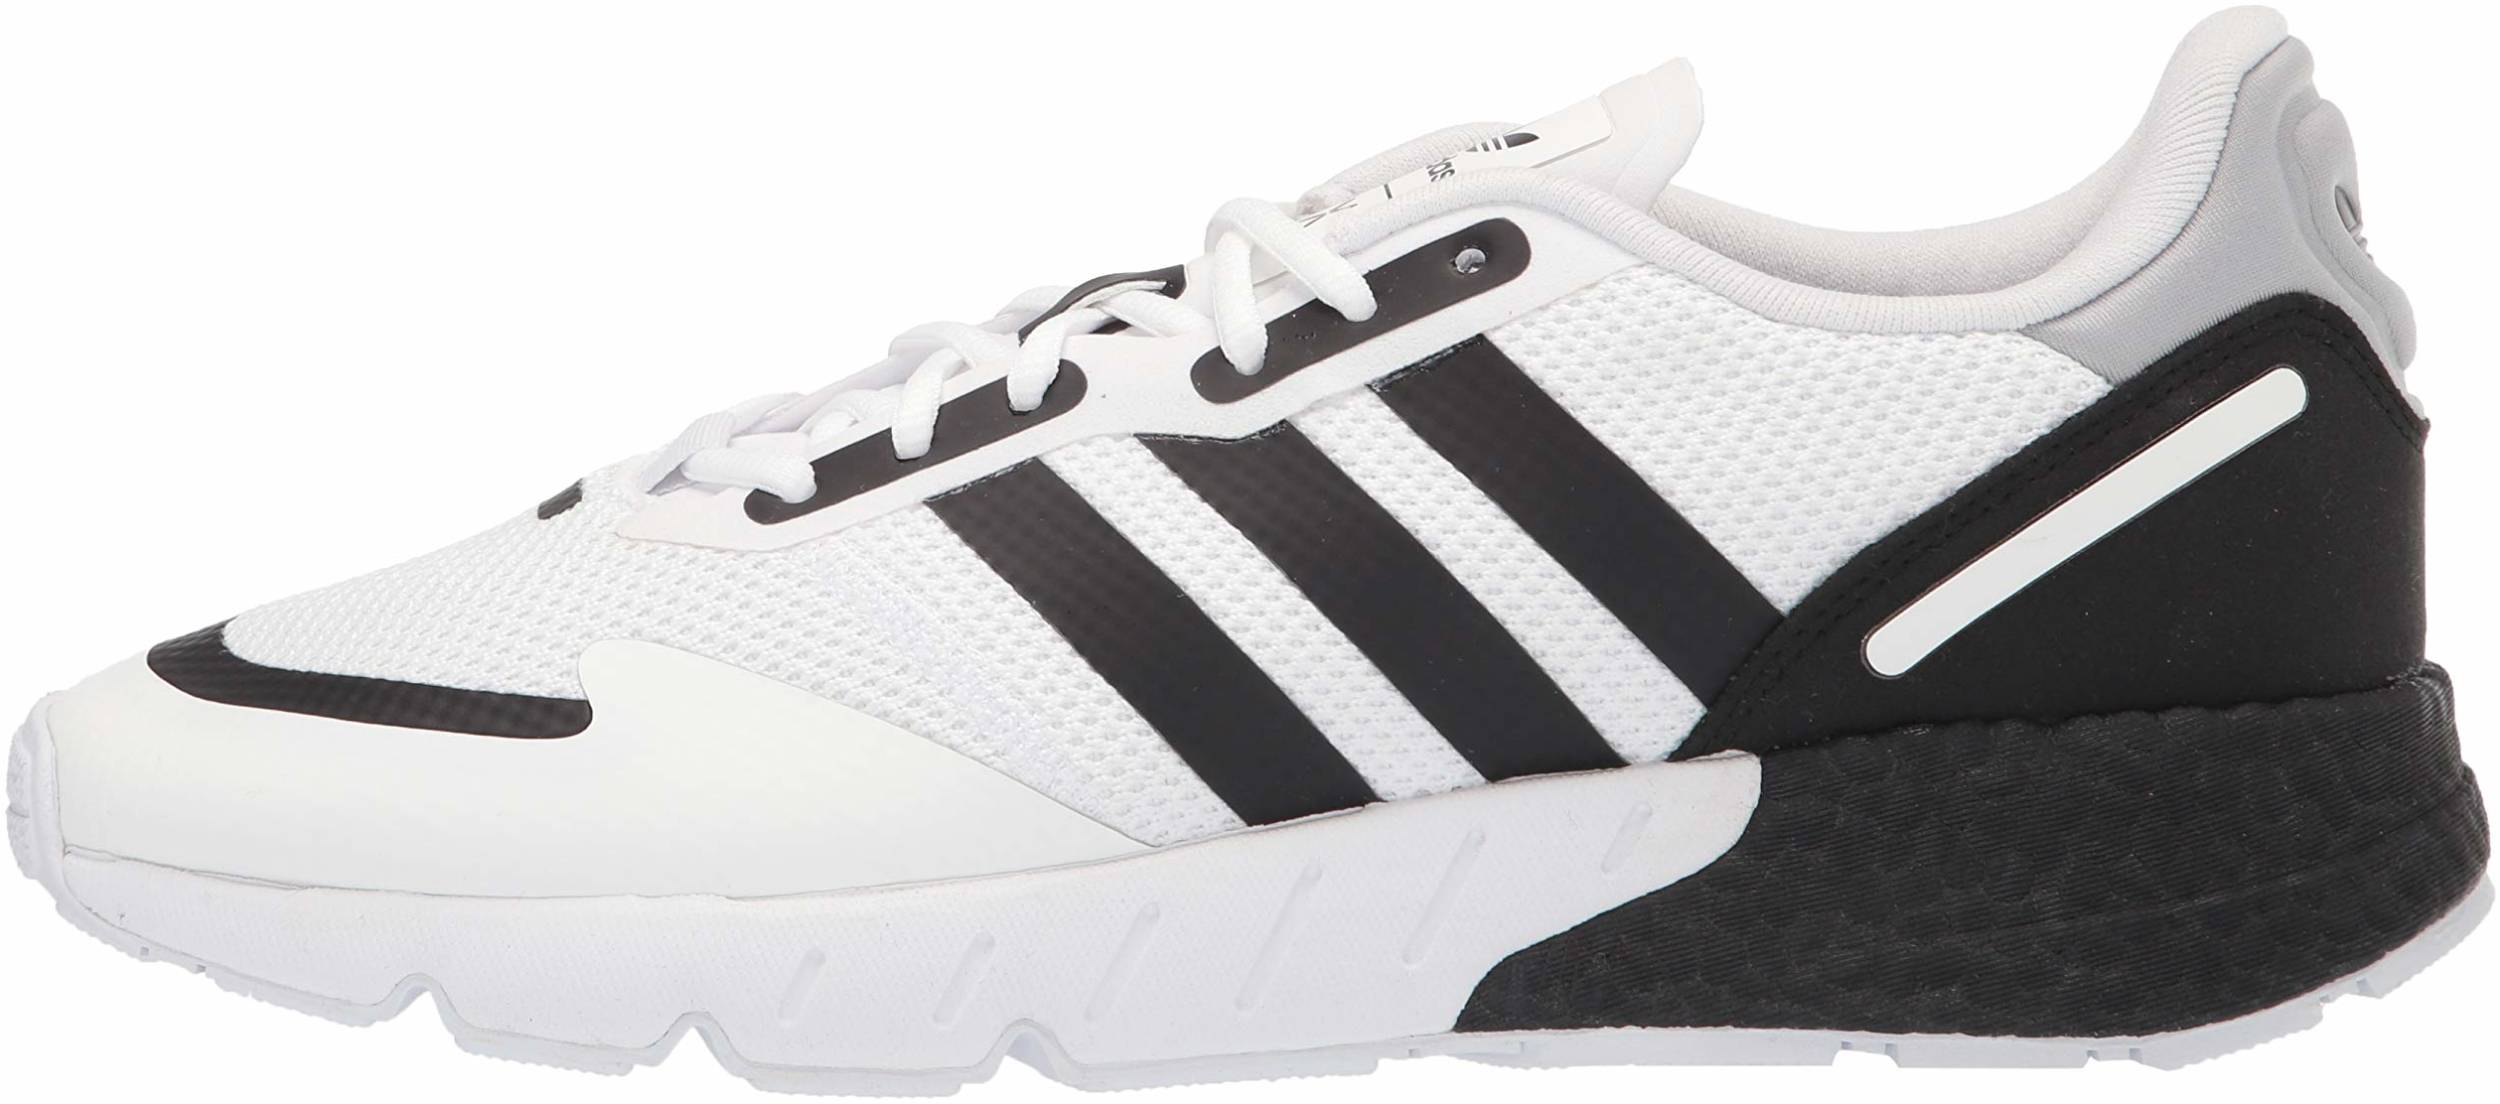 Adidas ZX 1K Boost sneakers in 10 colors (only $39) | RunRepeat